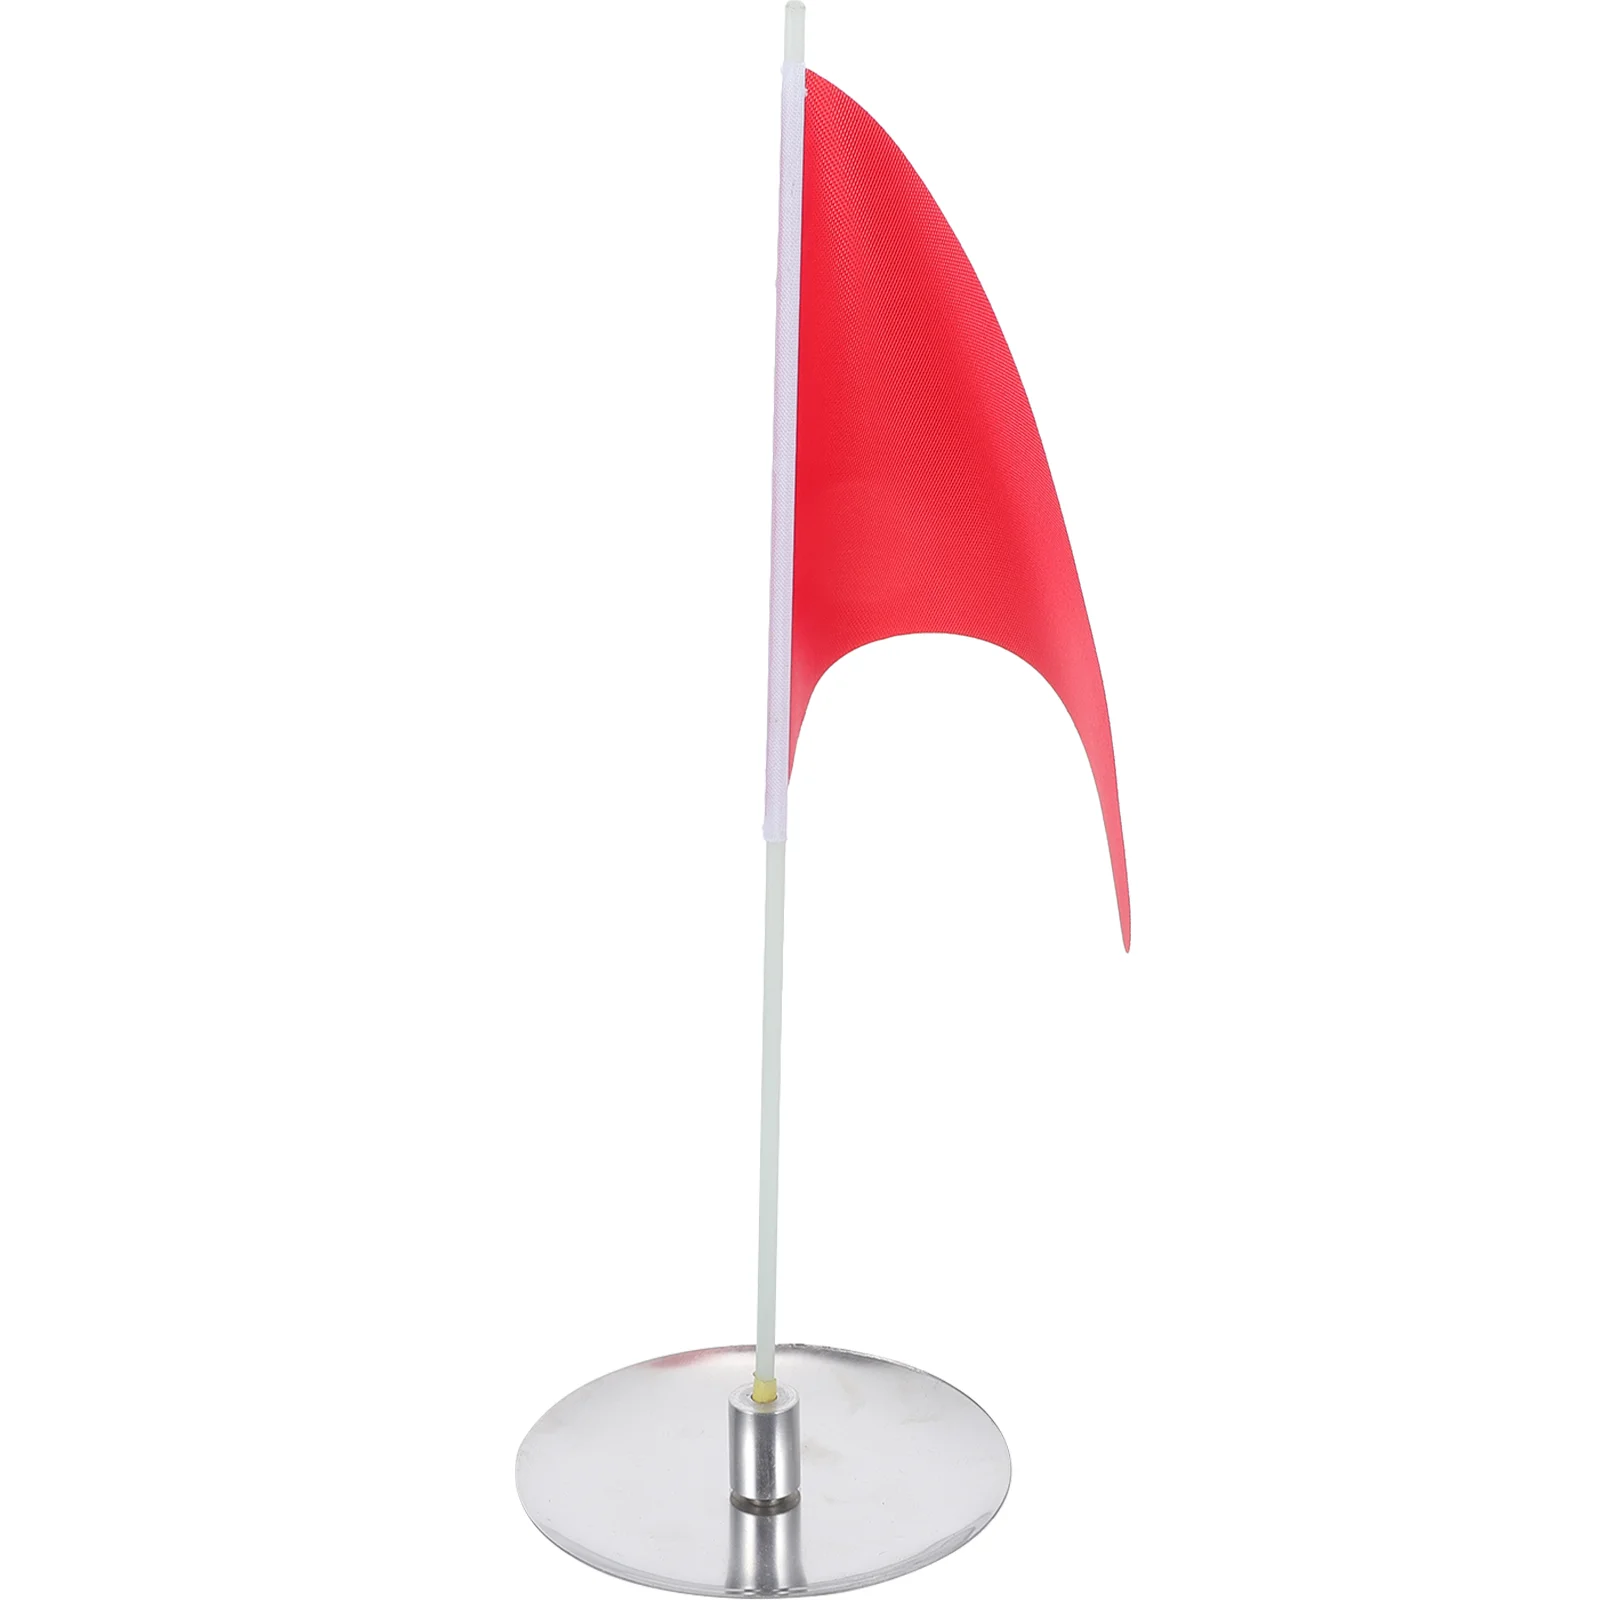 

Golf Flagpole Golfs Training Tool Target Golfing Flags Portable Flagstick Practice Mini Balls Small Stainless Steel